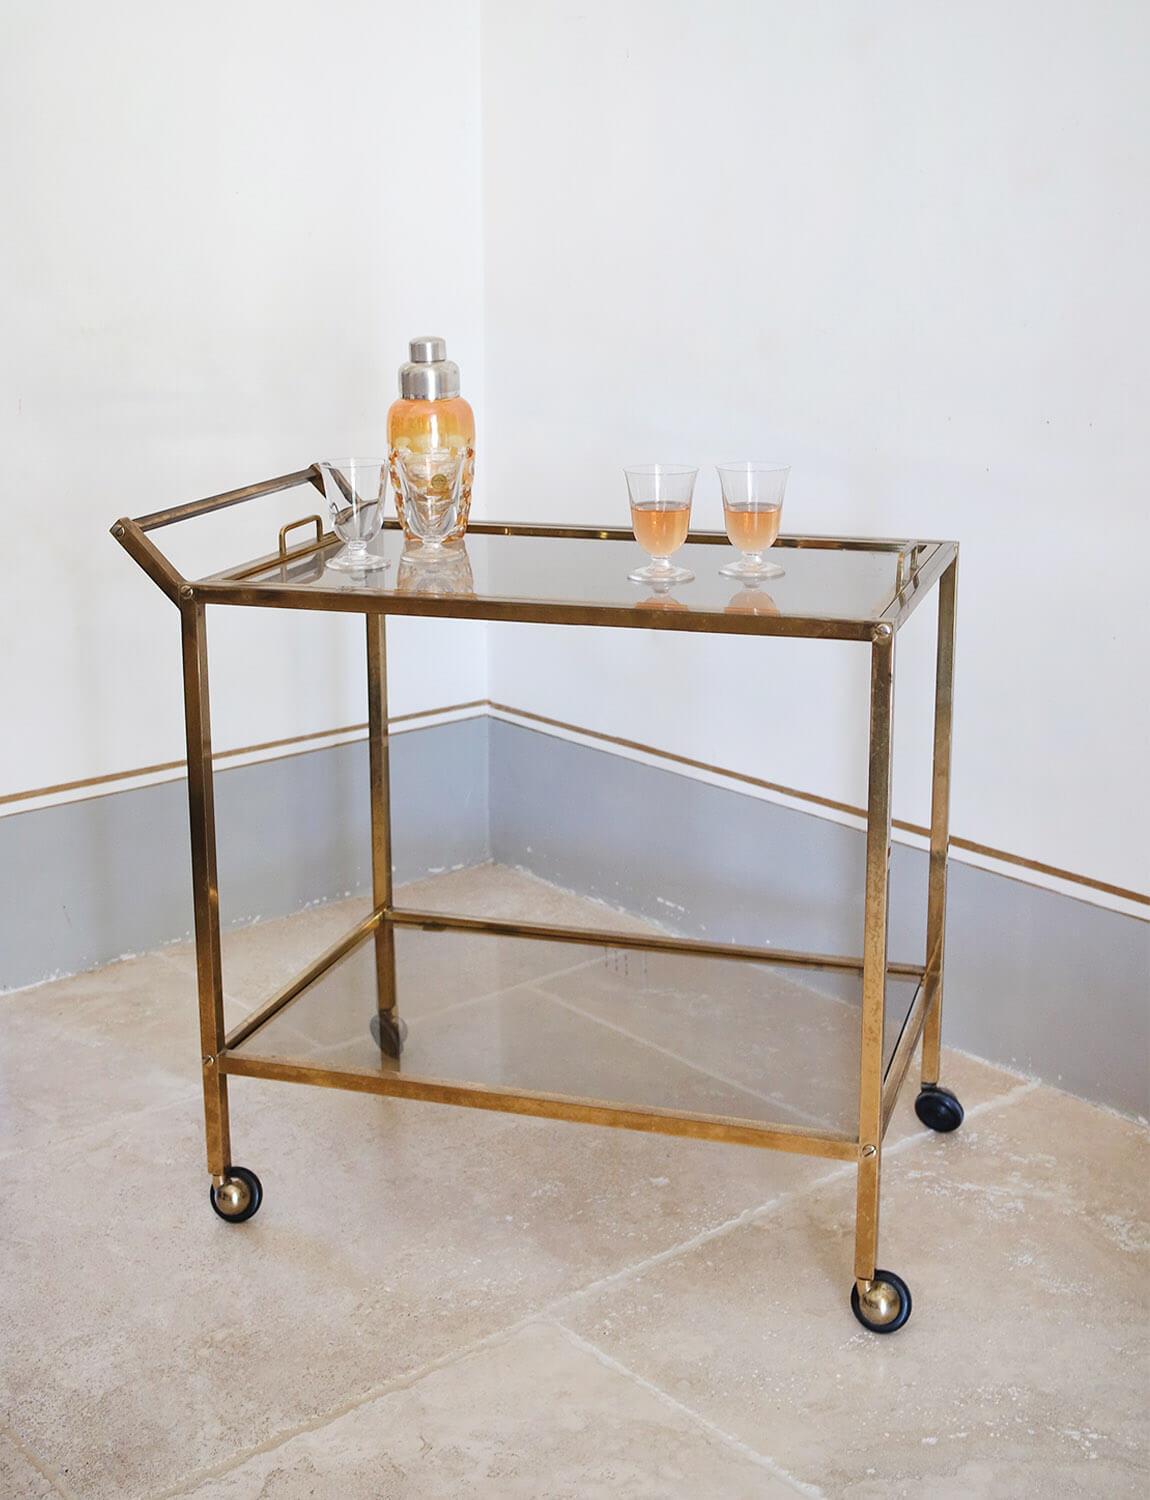 Gorgeous 1980s Italian drinks trolley / bar cart in brass and glass. The trolley has two glass shelves, a strong brass frame and beautiful brass bolts detail. The top glass shelf cleverly lifts off to make a glass tray with two handles. This piece